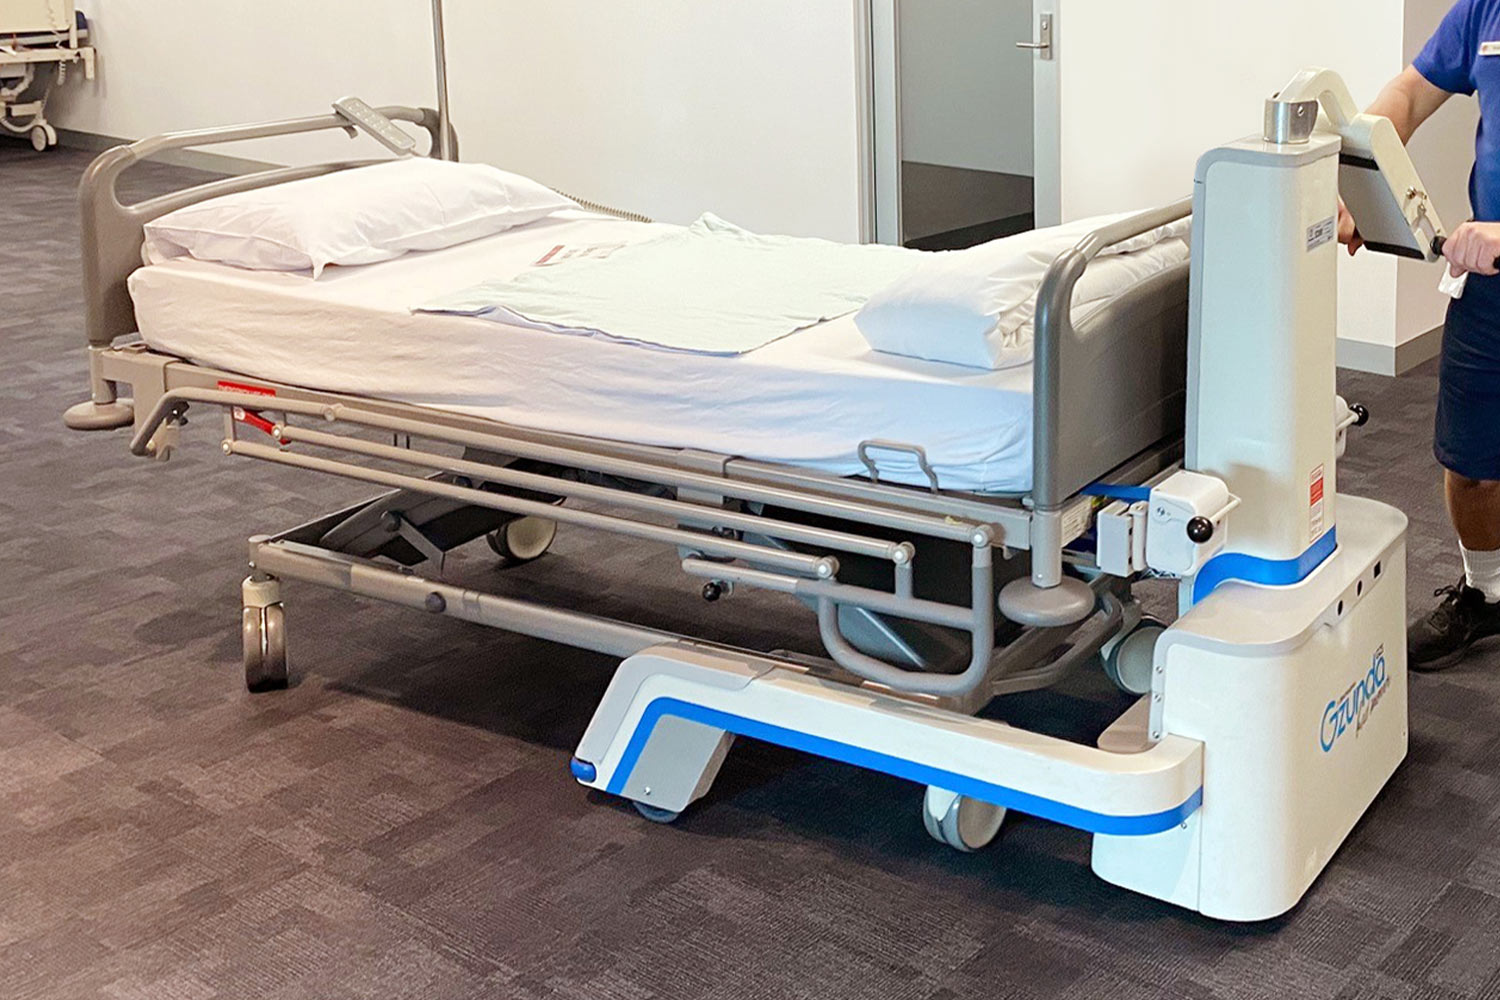 Electrodrive's Gzunda GZS powered bed mover in action